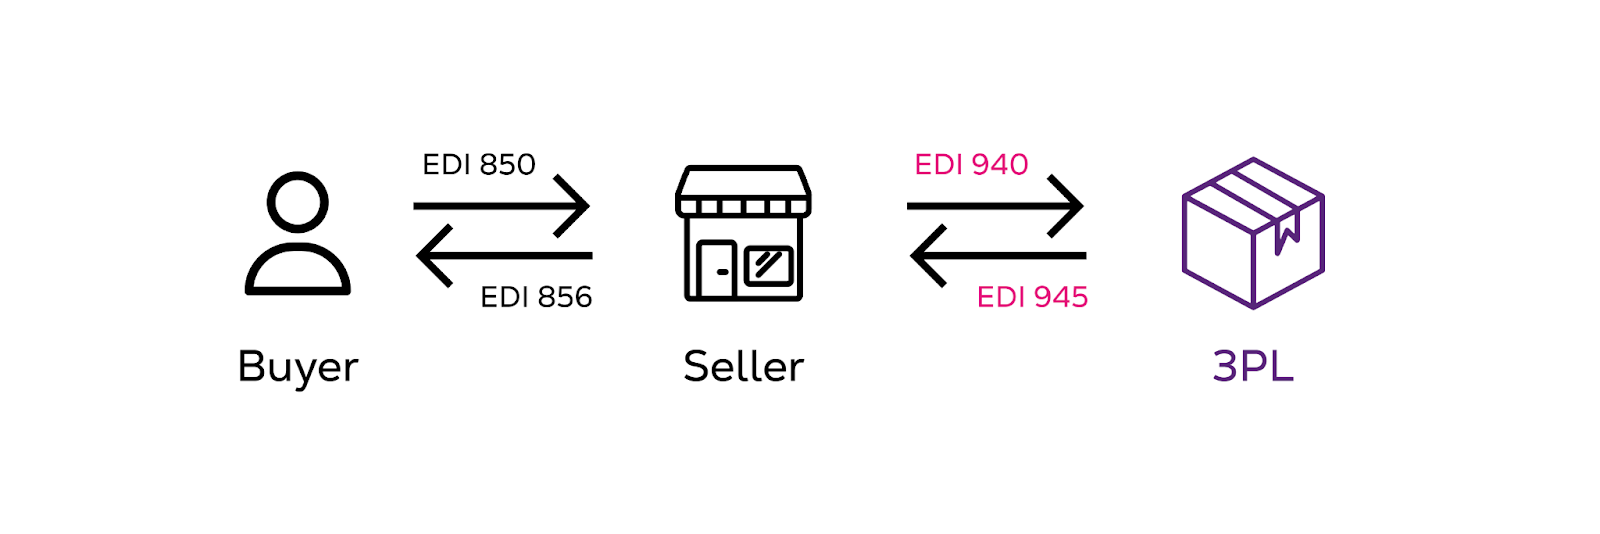 A 3PL warehouse shipping process that indicates the importance of EDI 940 and EDI 945. 